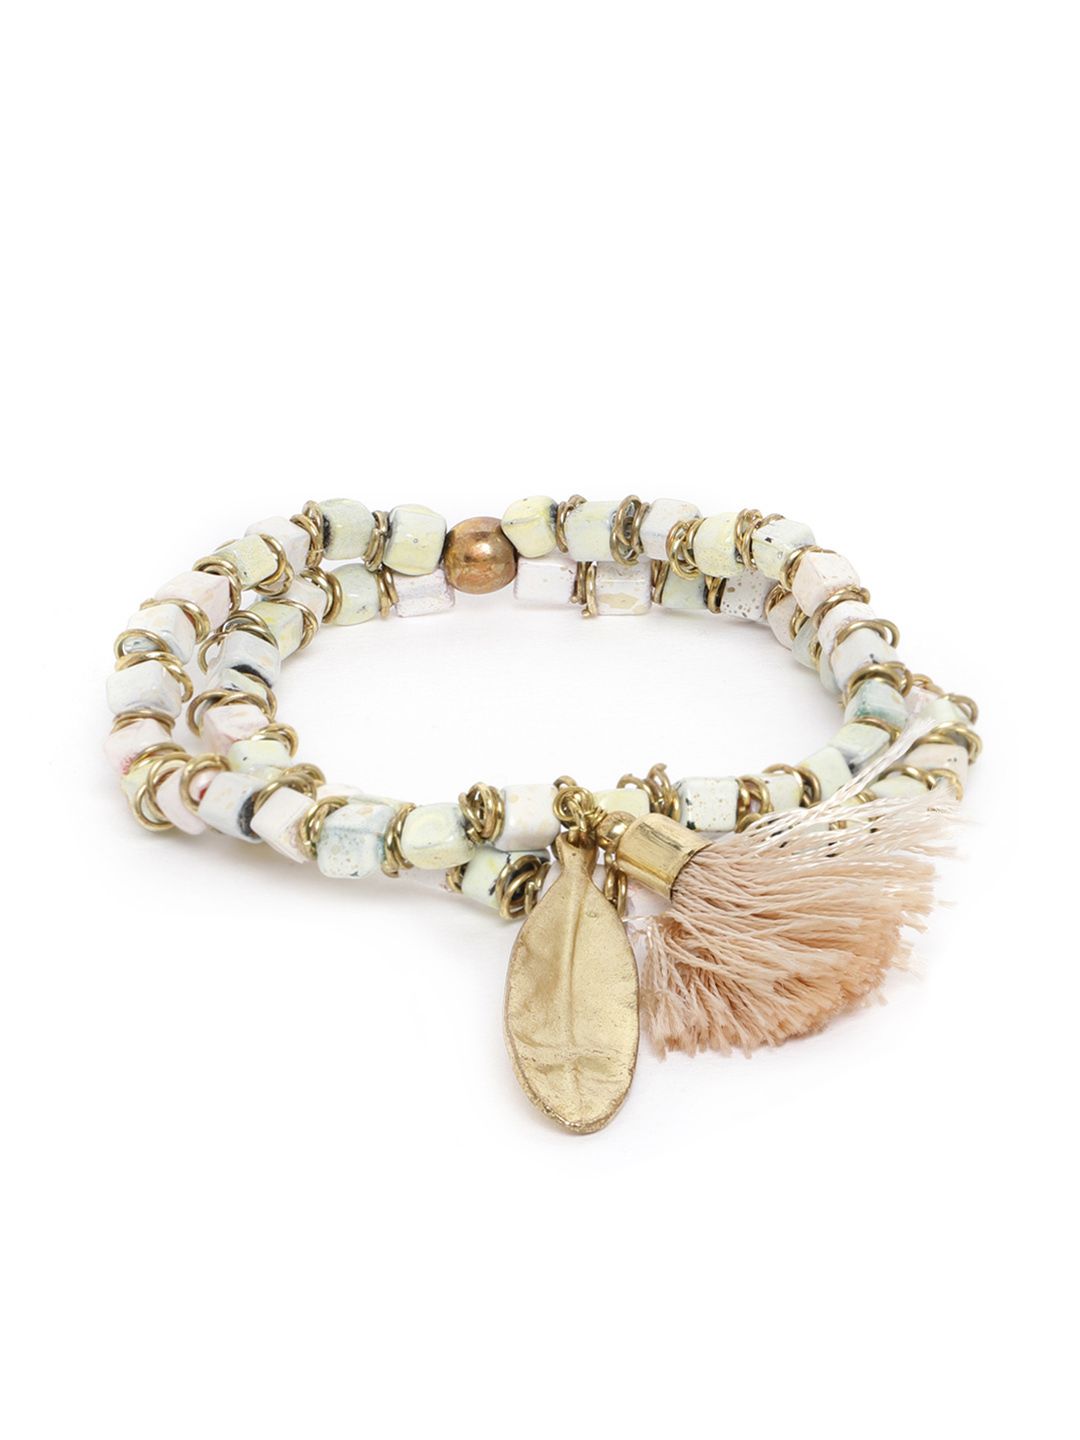 RICHEERA Off-White & Beige Gold-Plated Beaded Dual-Stranded Tasselled Elasticated Bracelet Price in India